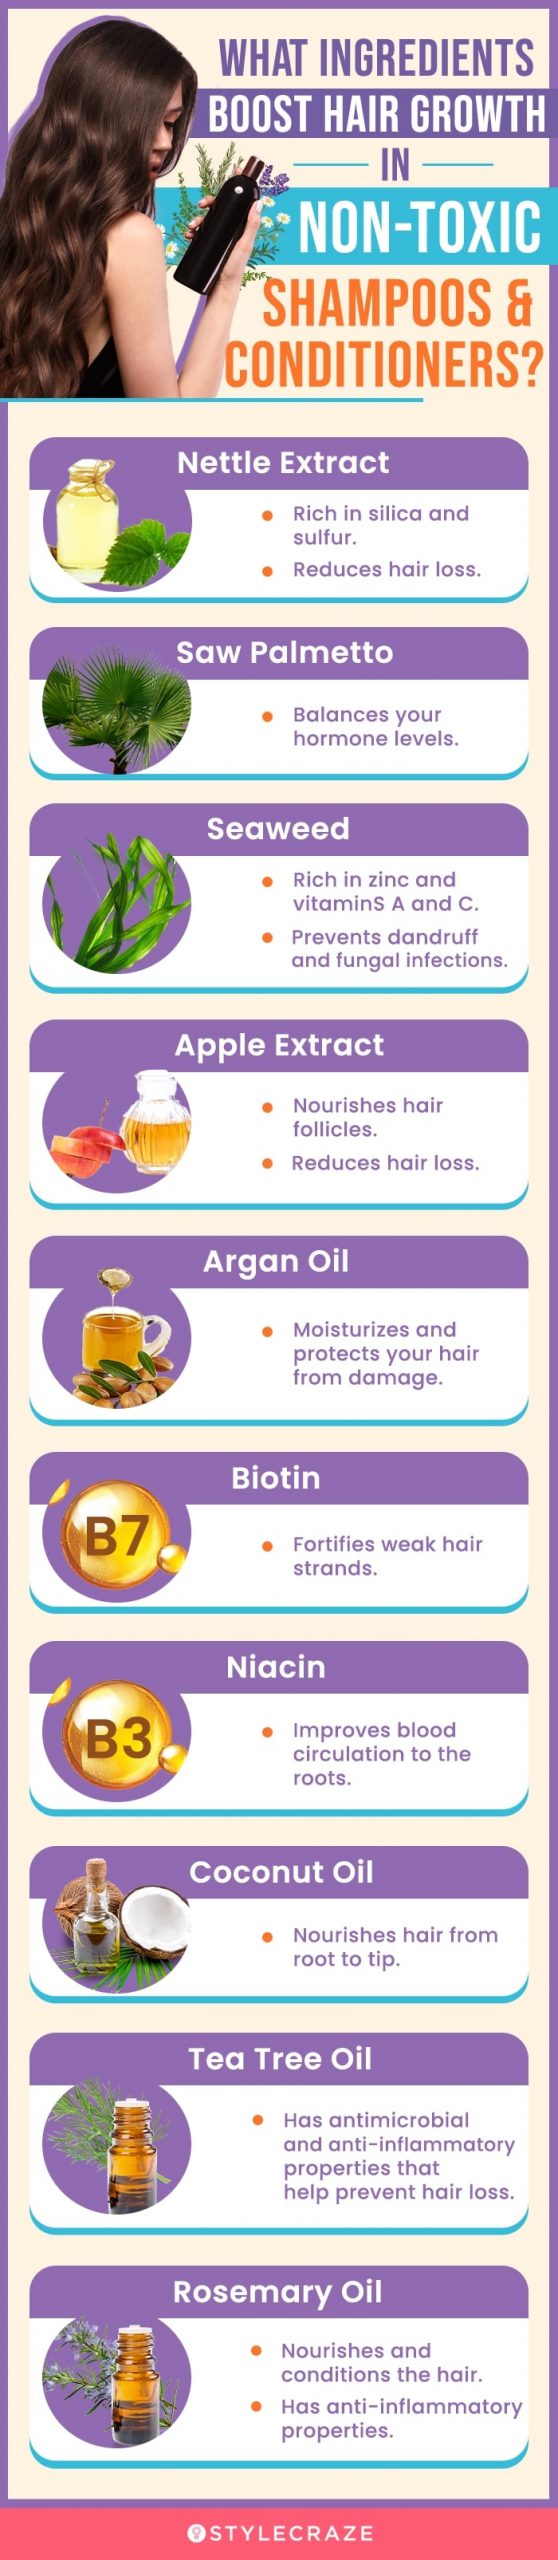 What Ingredients Boost Hair Growth In Non-Toxic Shampoo And Conditioners?  [infographic]